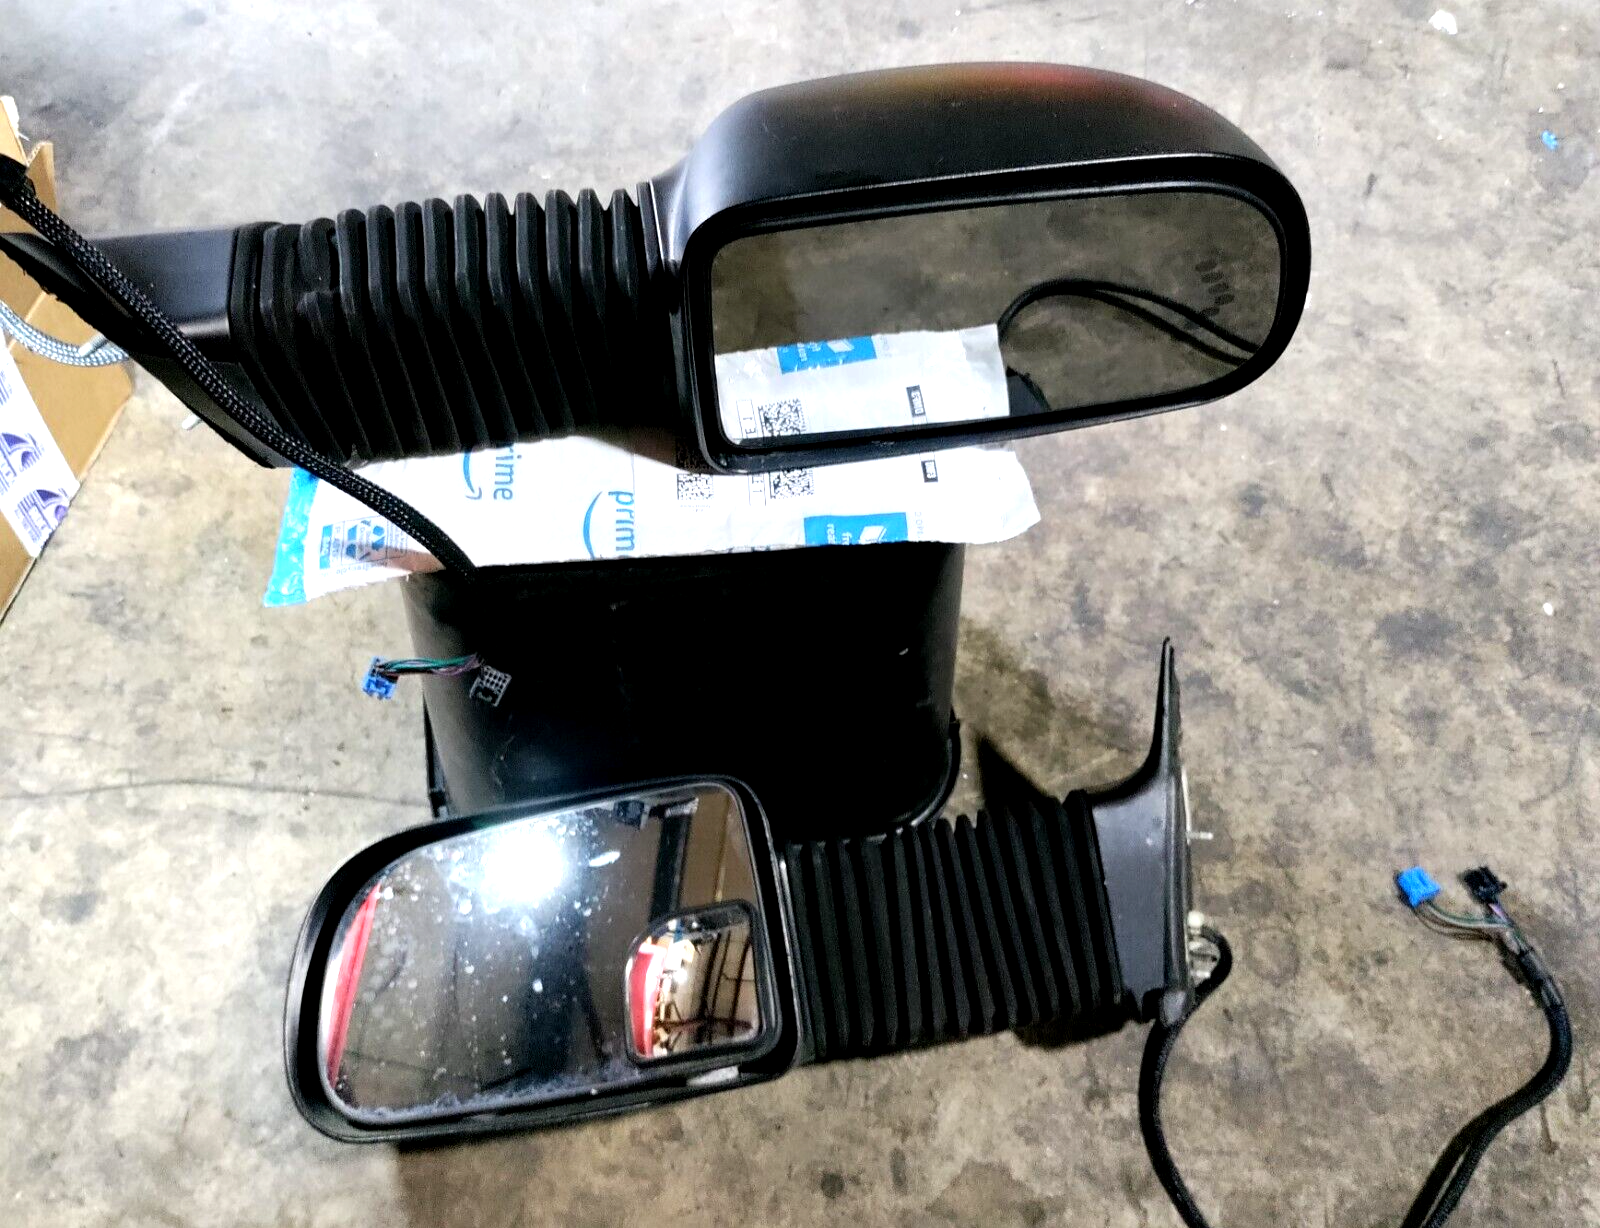 2 REAR VIEW MIRRORS FOR 2005 CHEVY SILVERADO 3500 / TOWING MIRRORS IN & OUT USED